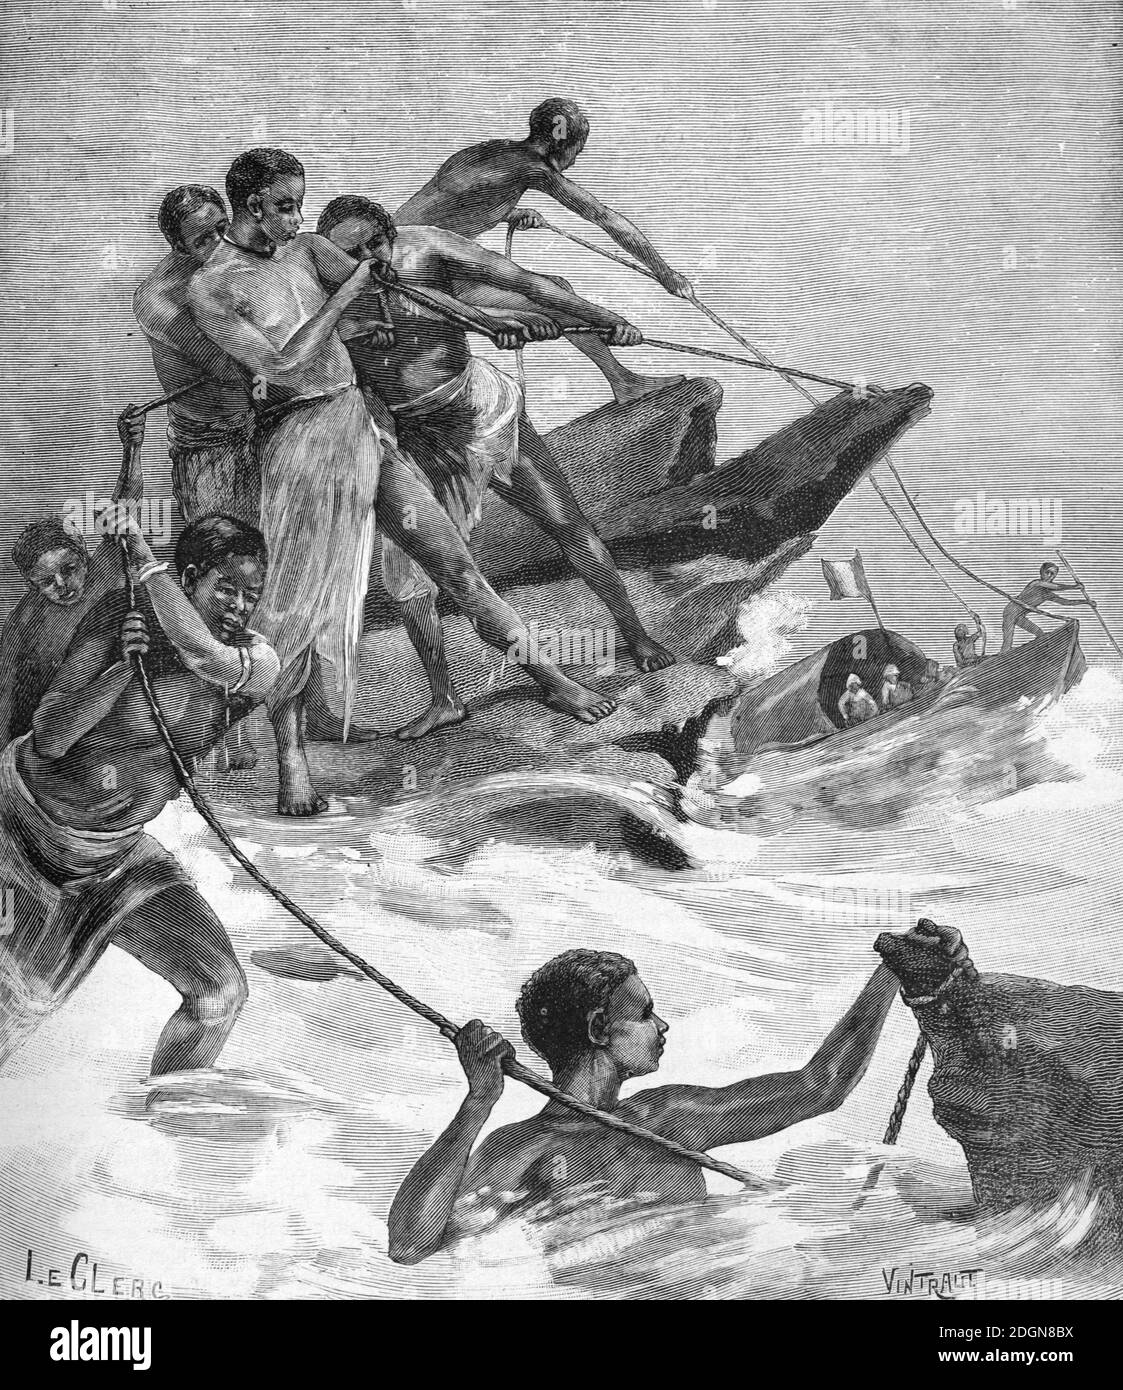 French Colonials, Explorers & Natives or Africans Navigating the Niger River in West Africa (Engr 1896 LeClerc-Vintraut) Vintage Illustration or Engraving Stock Photo